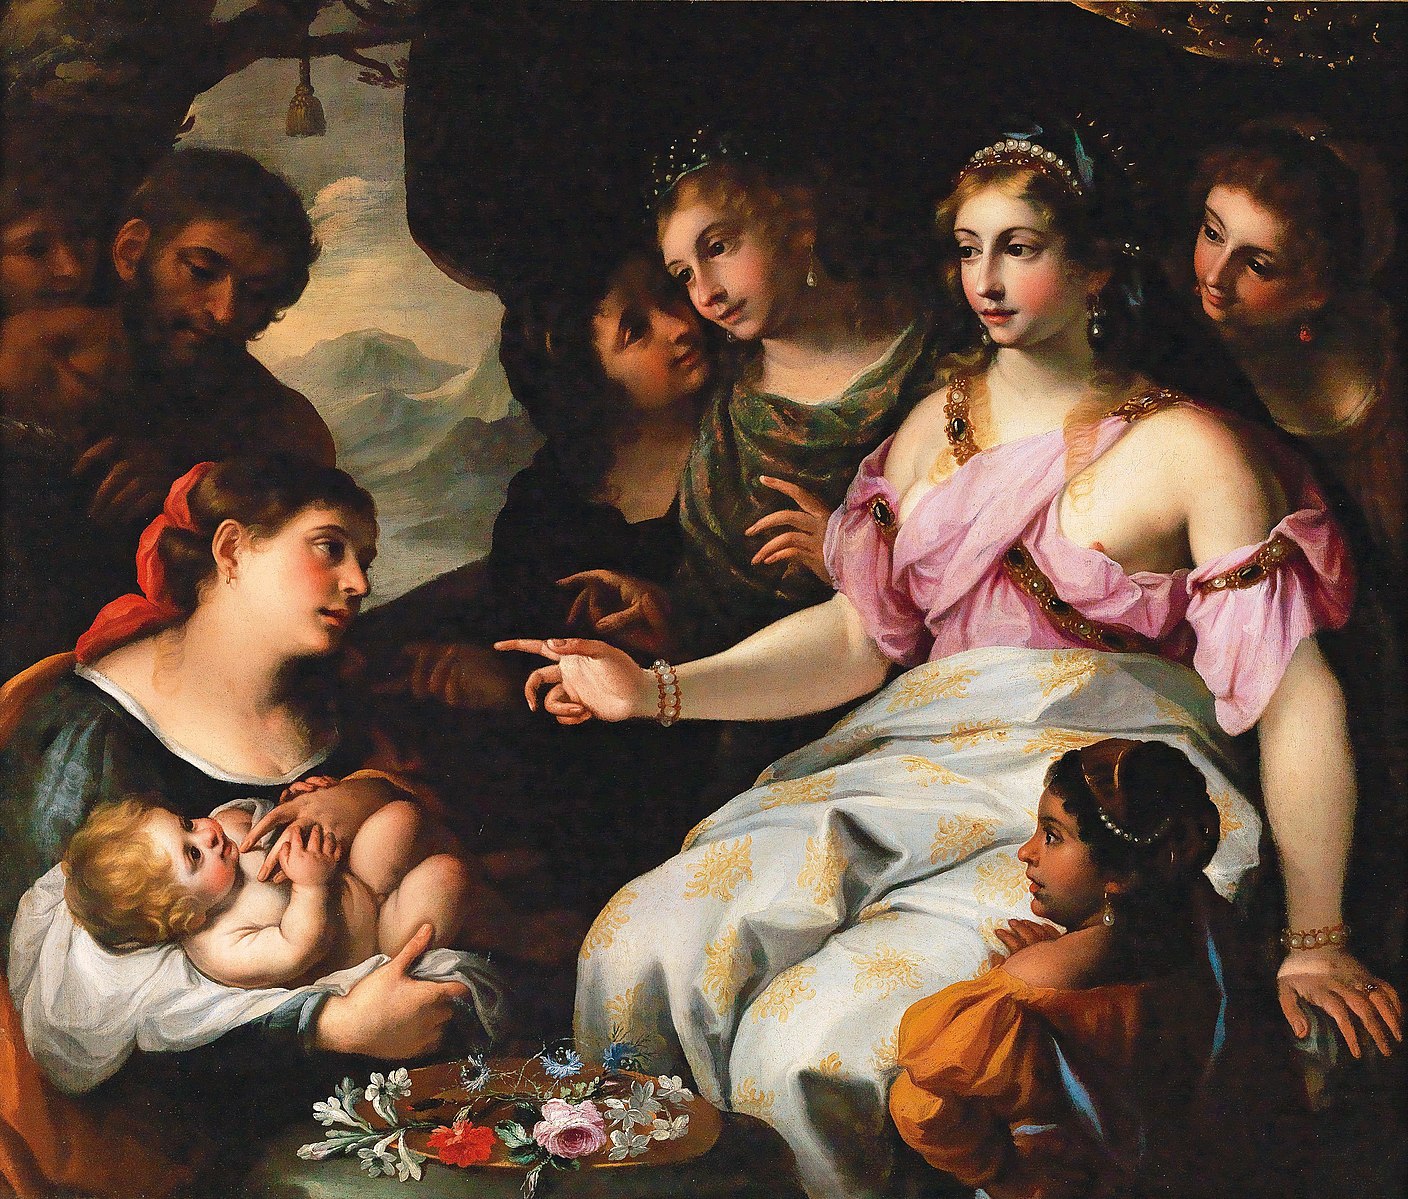 The main figure is a young woman, who sits with four other young women surrounding her. Another woman is kneeled in front of her, presenting a nude infant that is partially wrapped in a white cloth. The central figure points to the woman with her right hand. Alongside the infant, there is a tray with several flowers. Behind the woman holding the infant, there are two additional figures. 